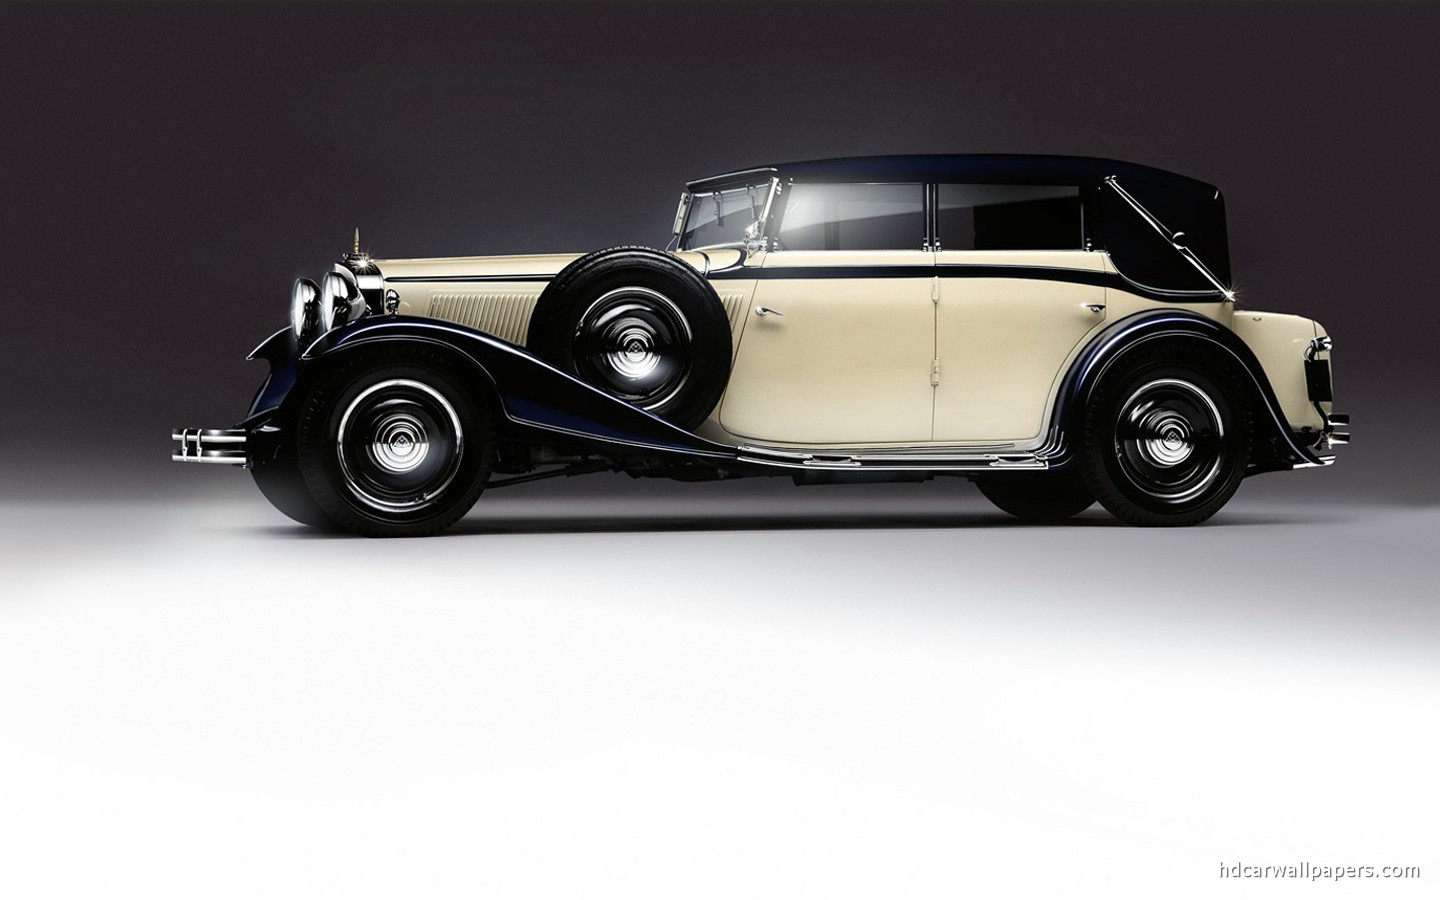 This is also Classic Car Wallpaper This car has white and black 1440x900